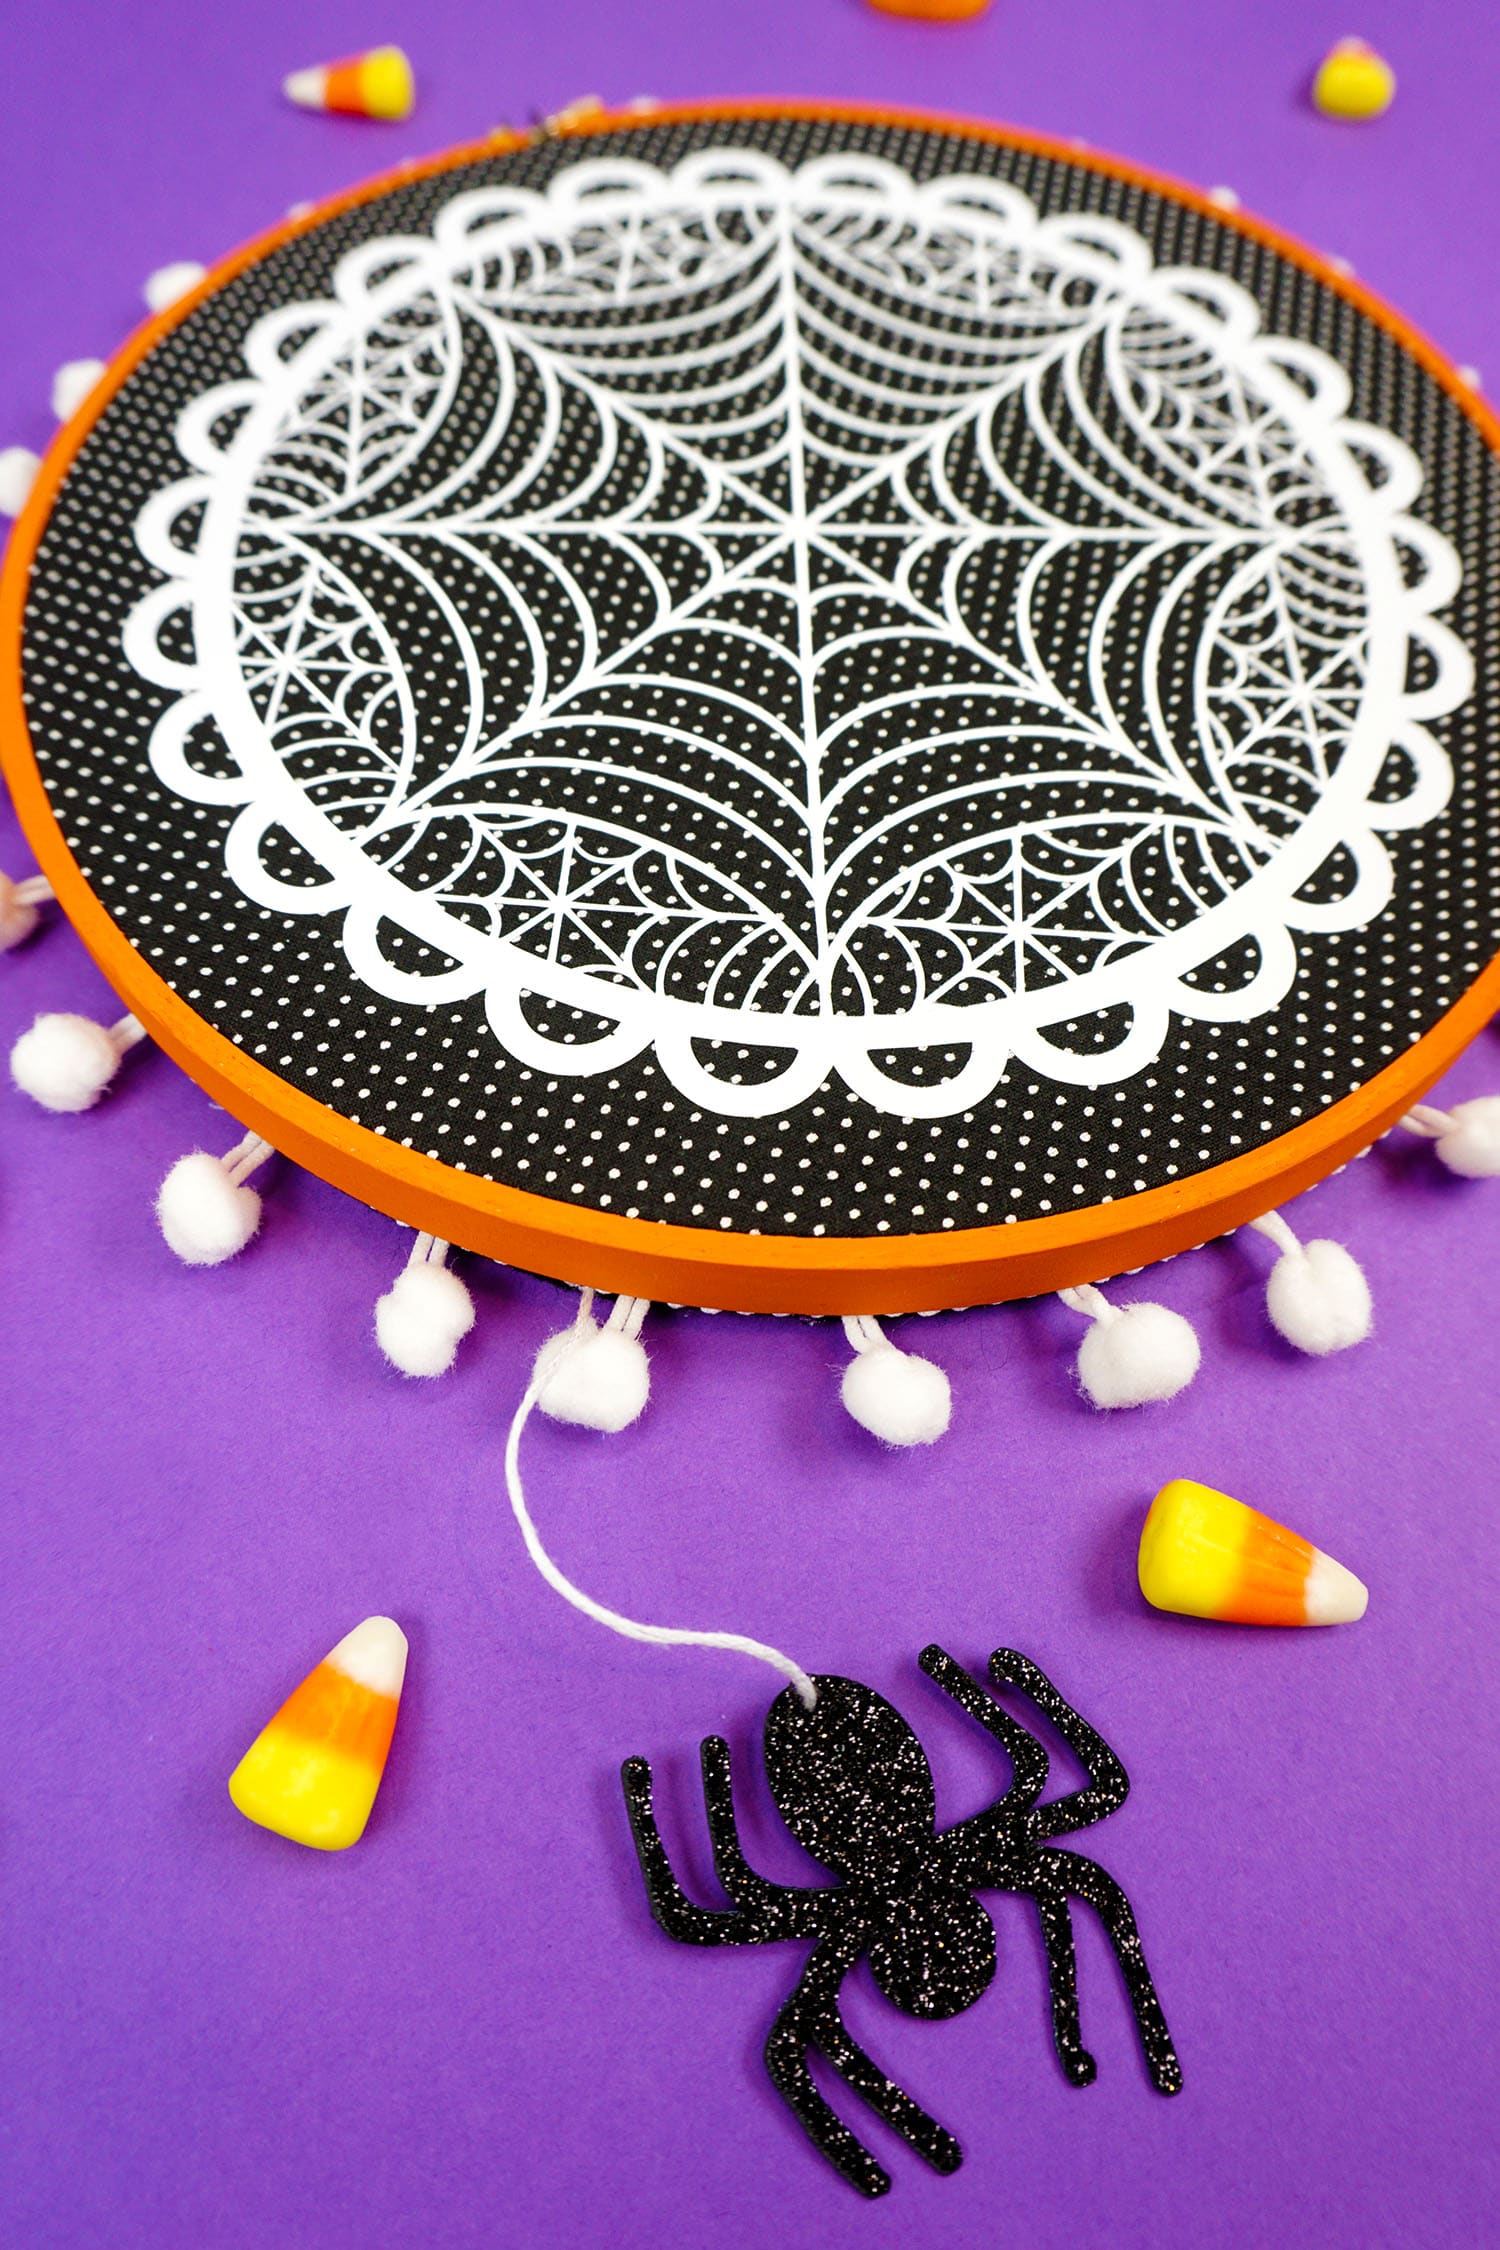 spider dangling from spider web embroidery hoop project